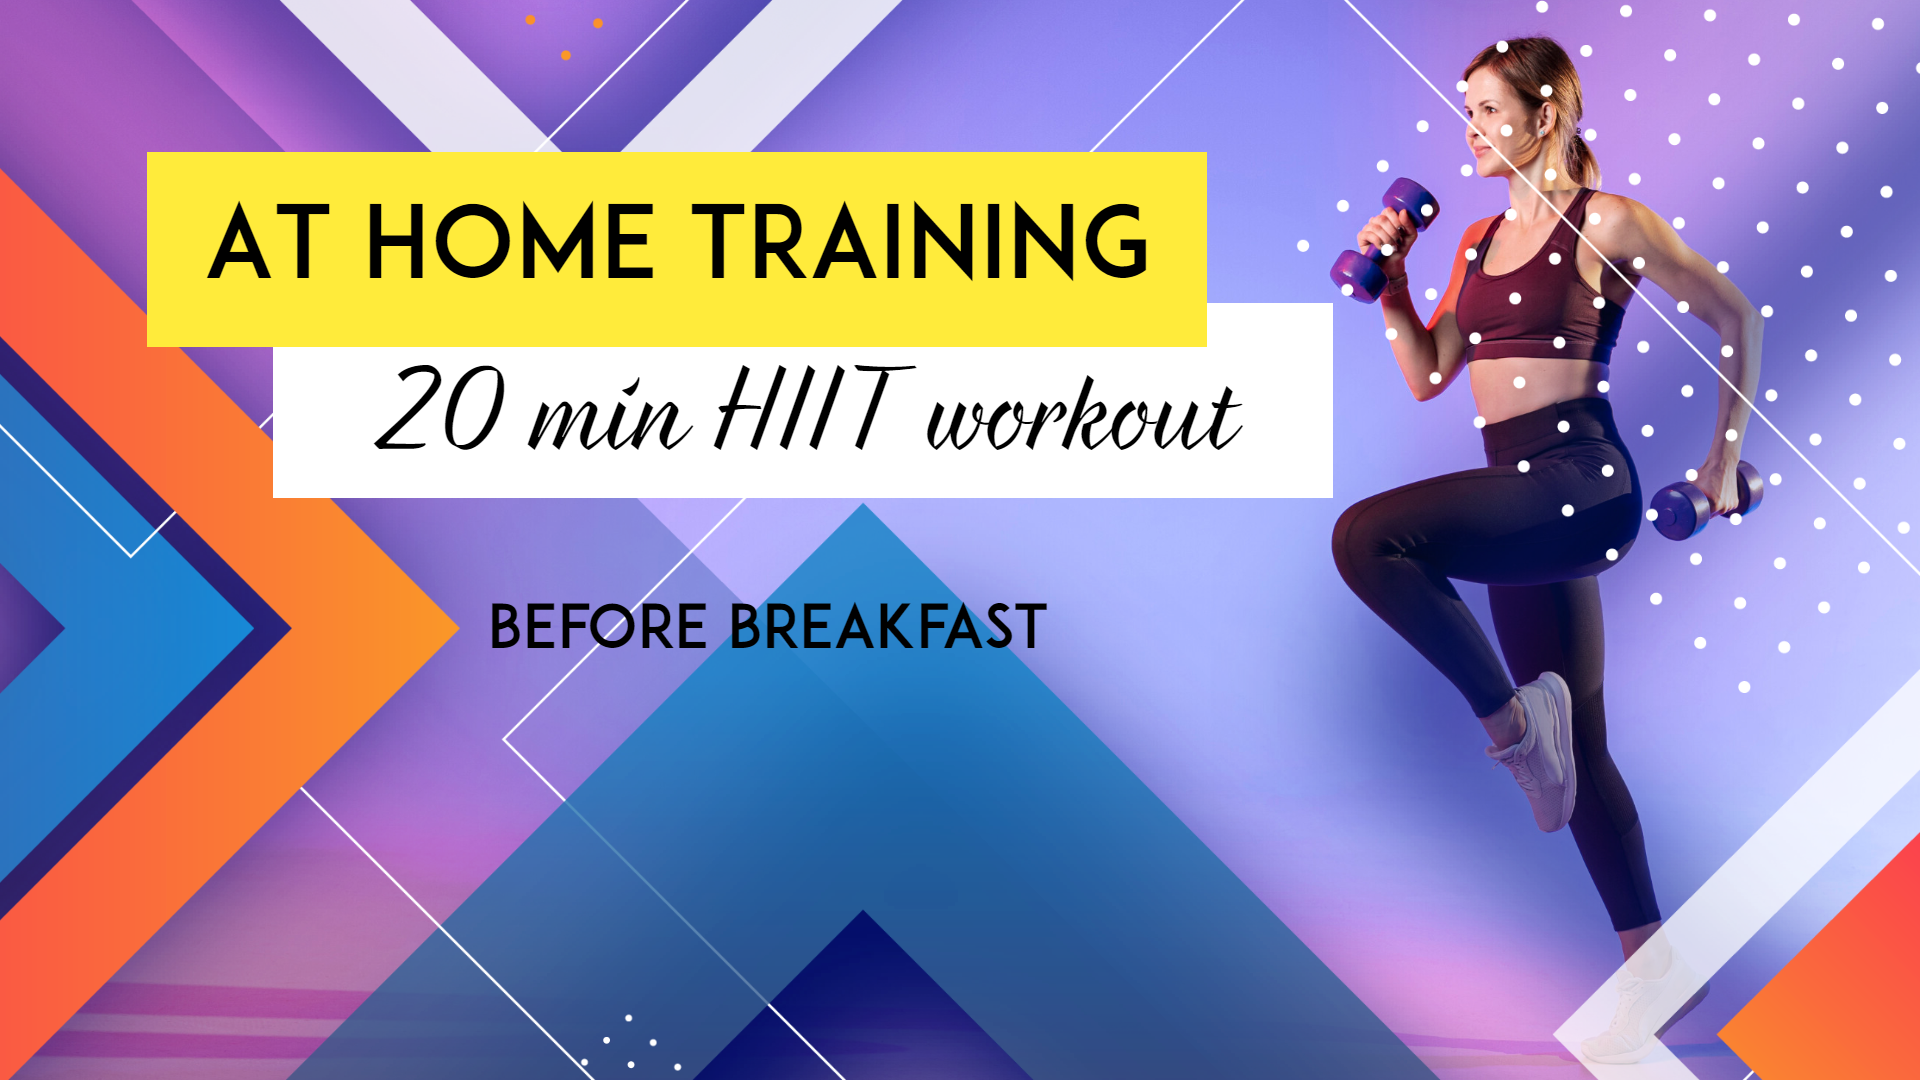 Youtube Fitness Training At Home Design  Template 